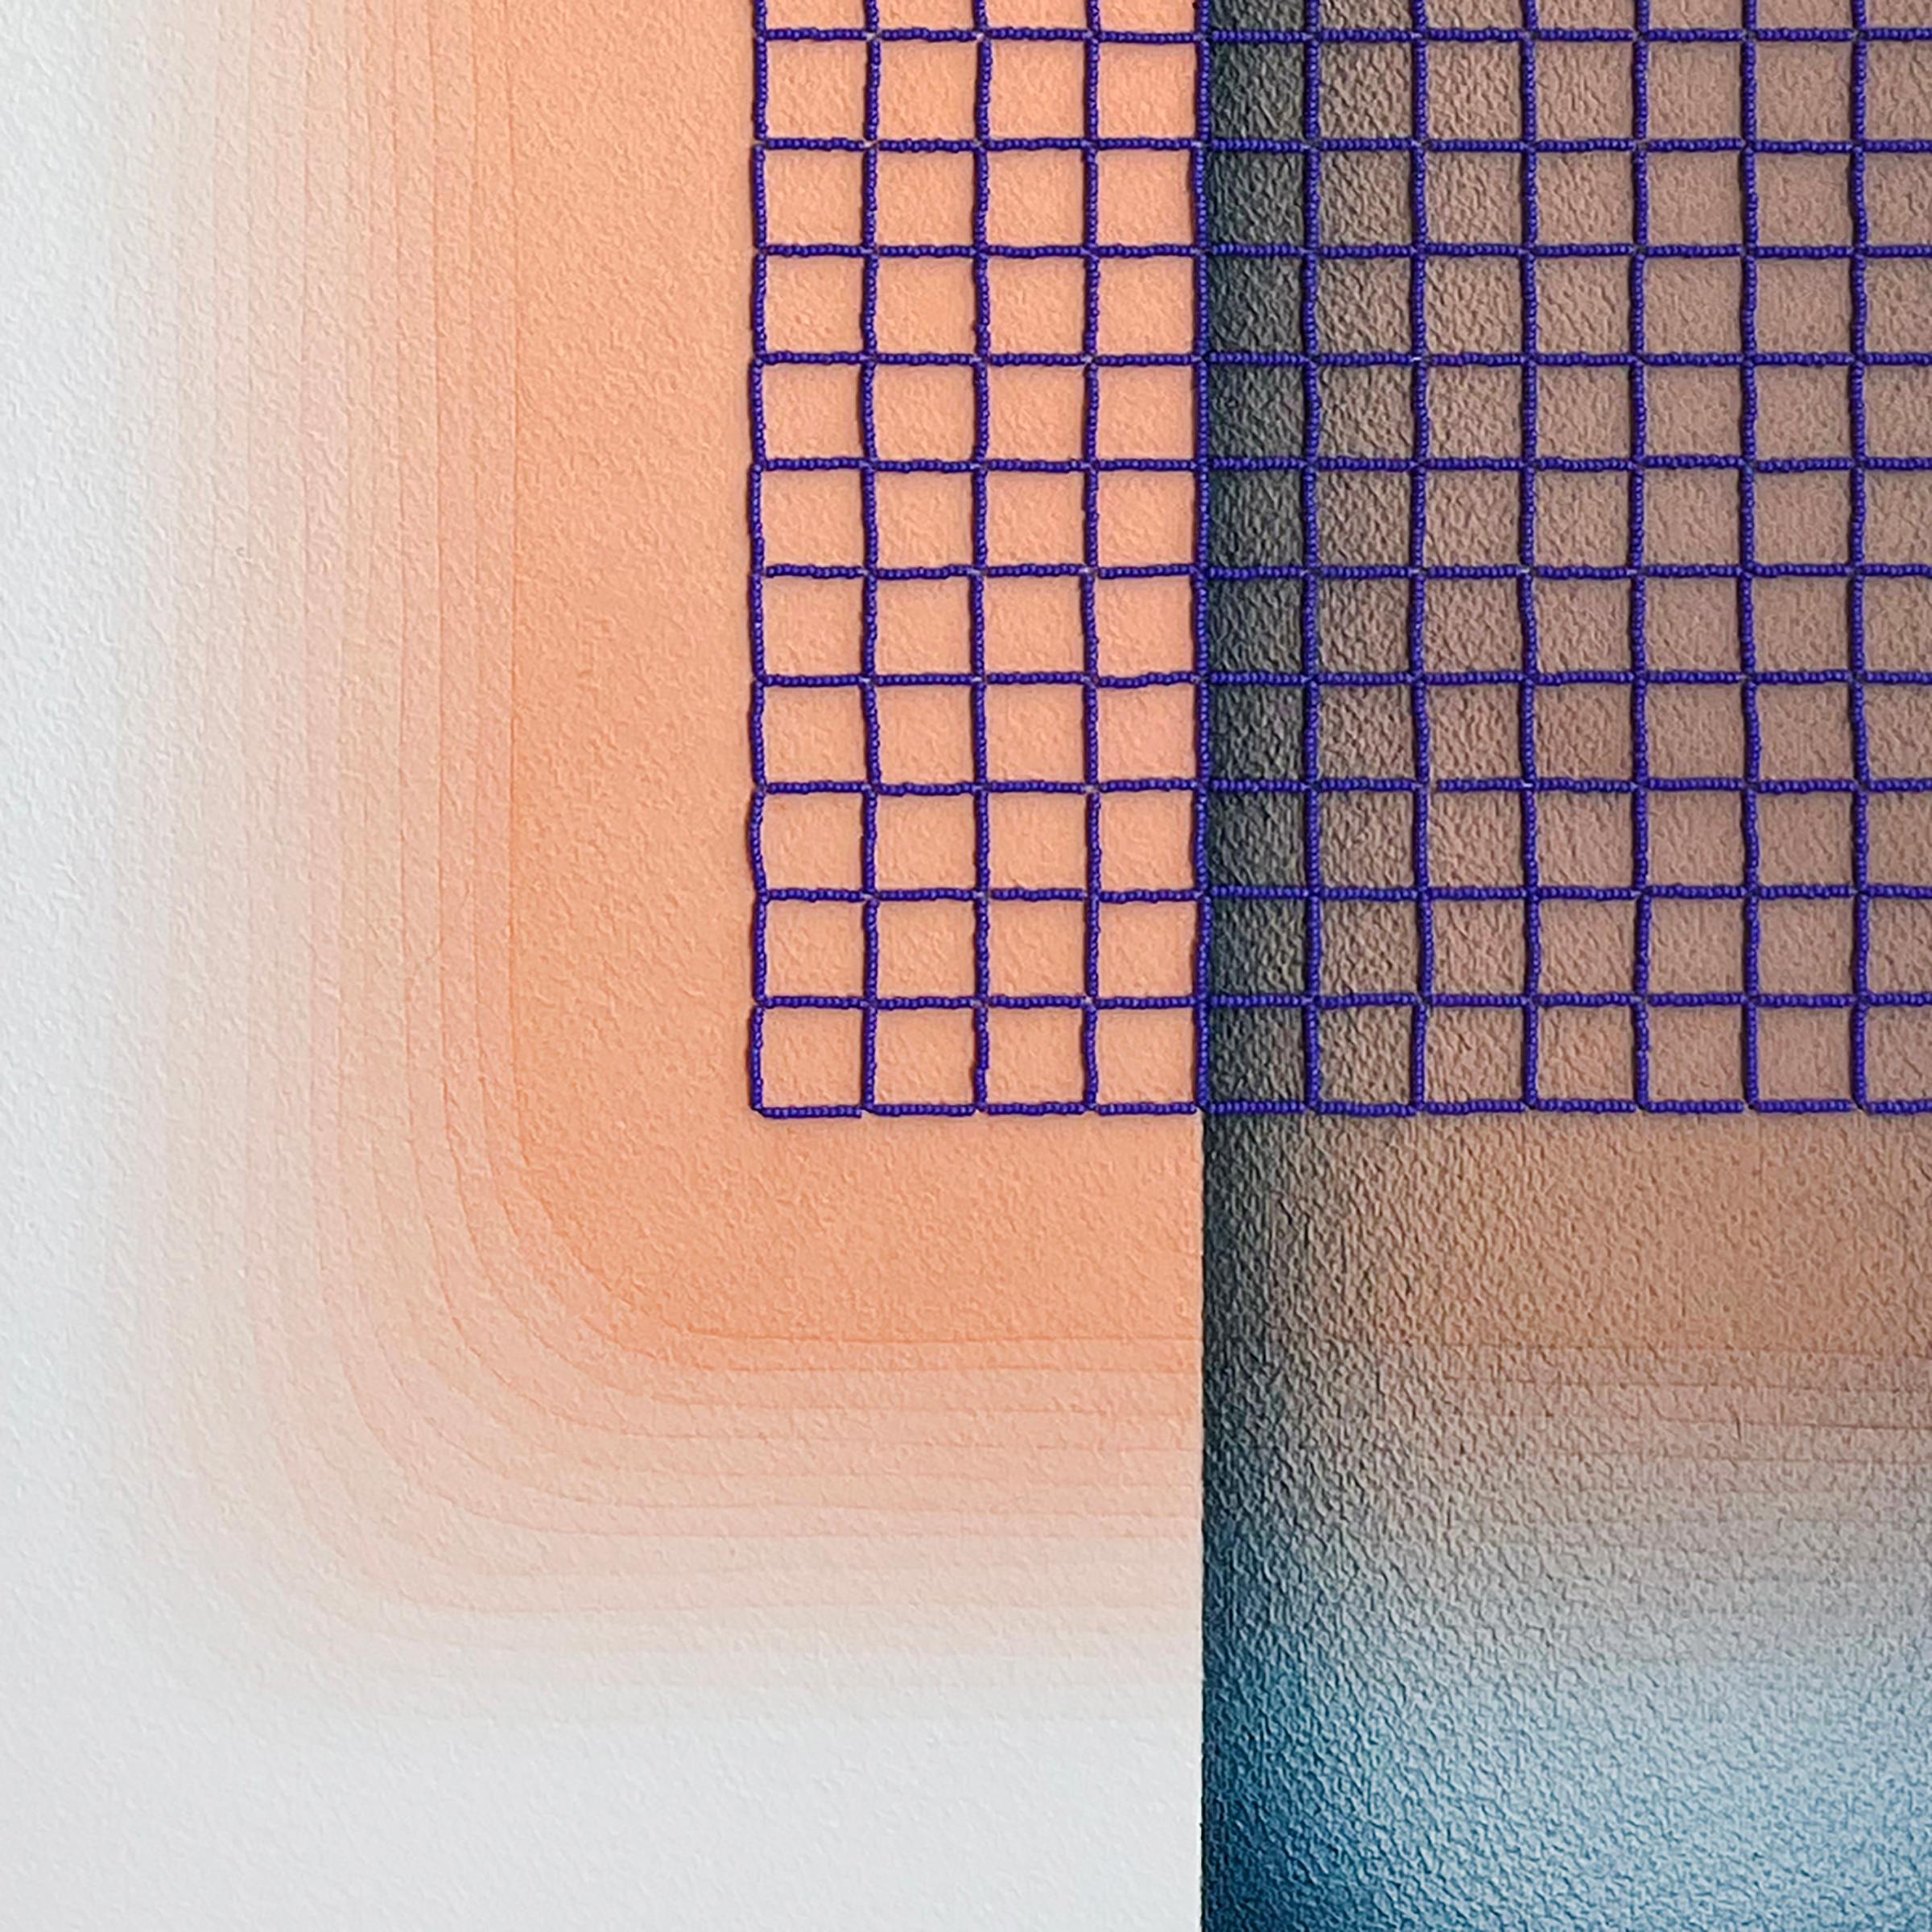 This piece features hues of peach, blue, and purple.

Atlanta-based artist and designer Gretchen Wagner is influenced by the use of color and their interactions. Her most recent body of work, “Color Interactions IV,” challenges our ability to focus